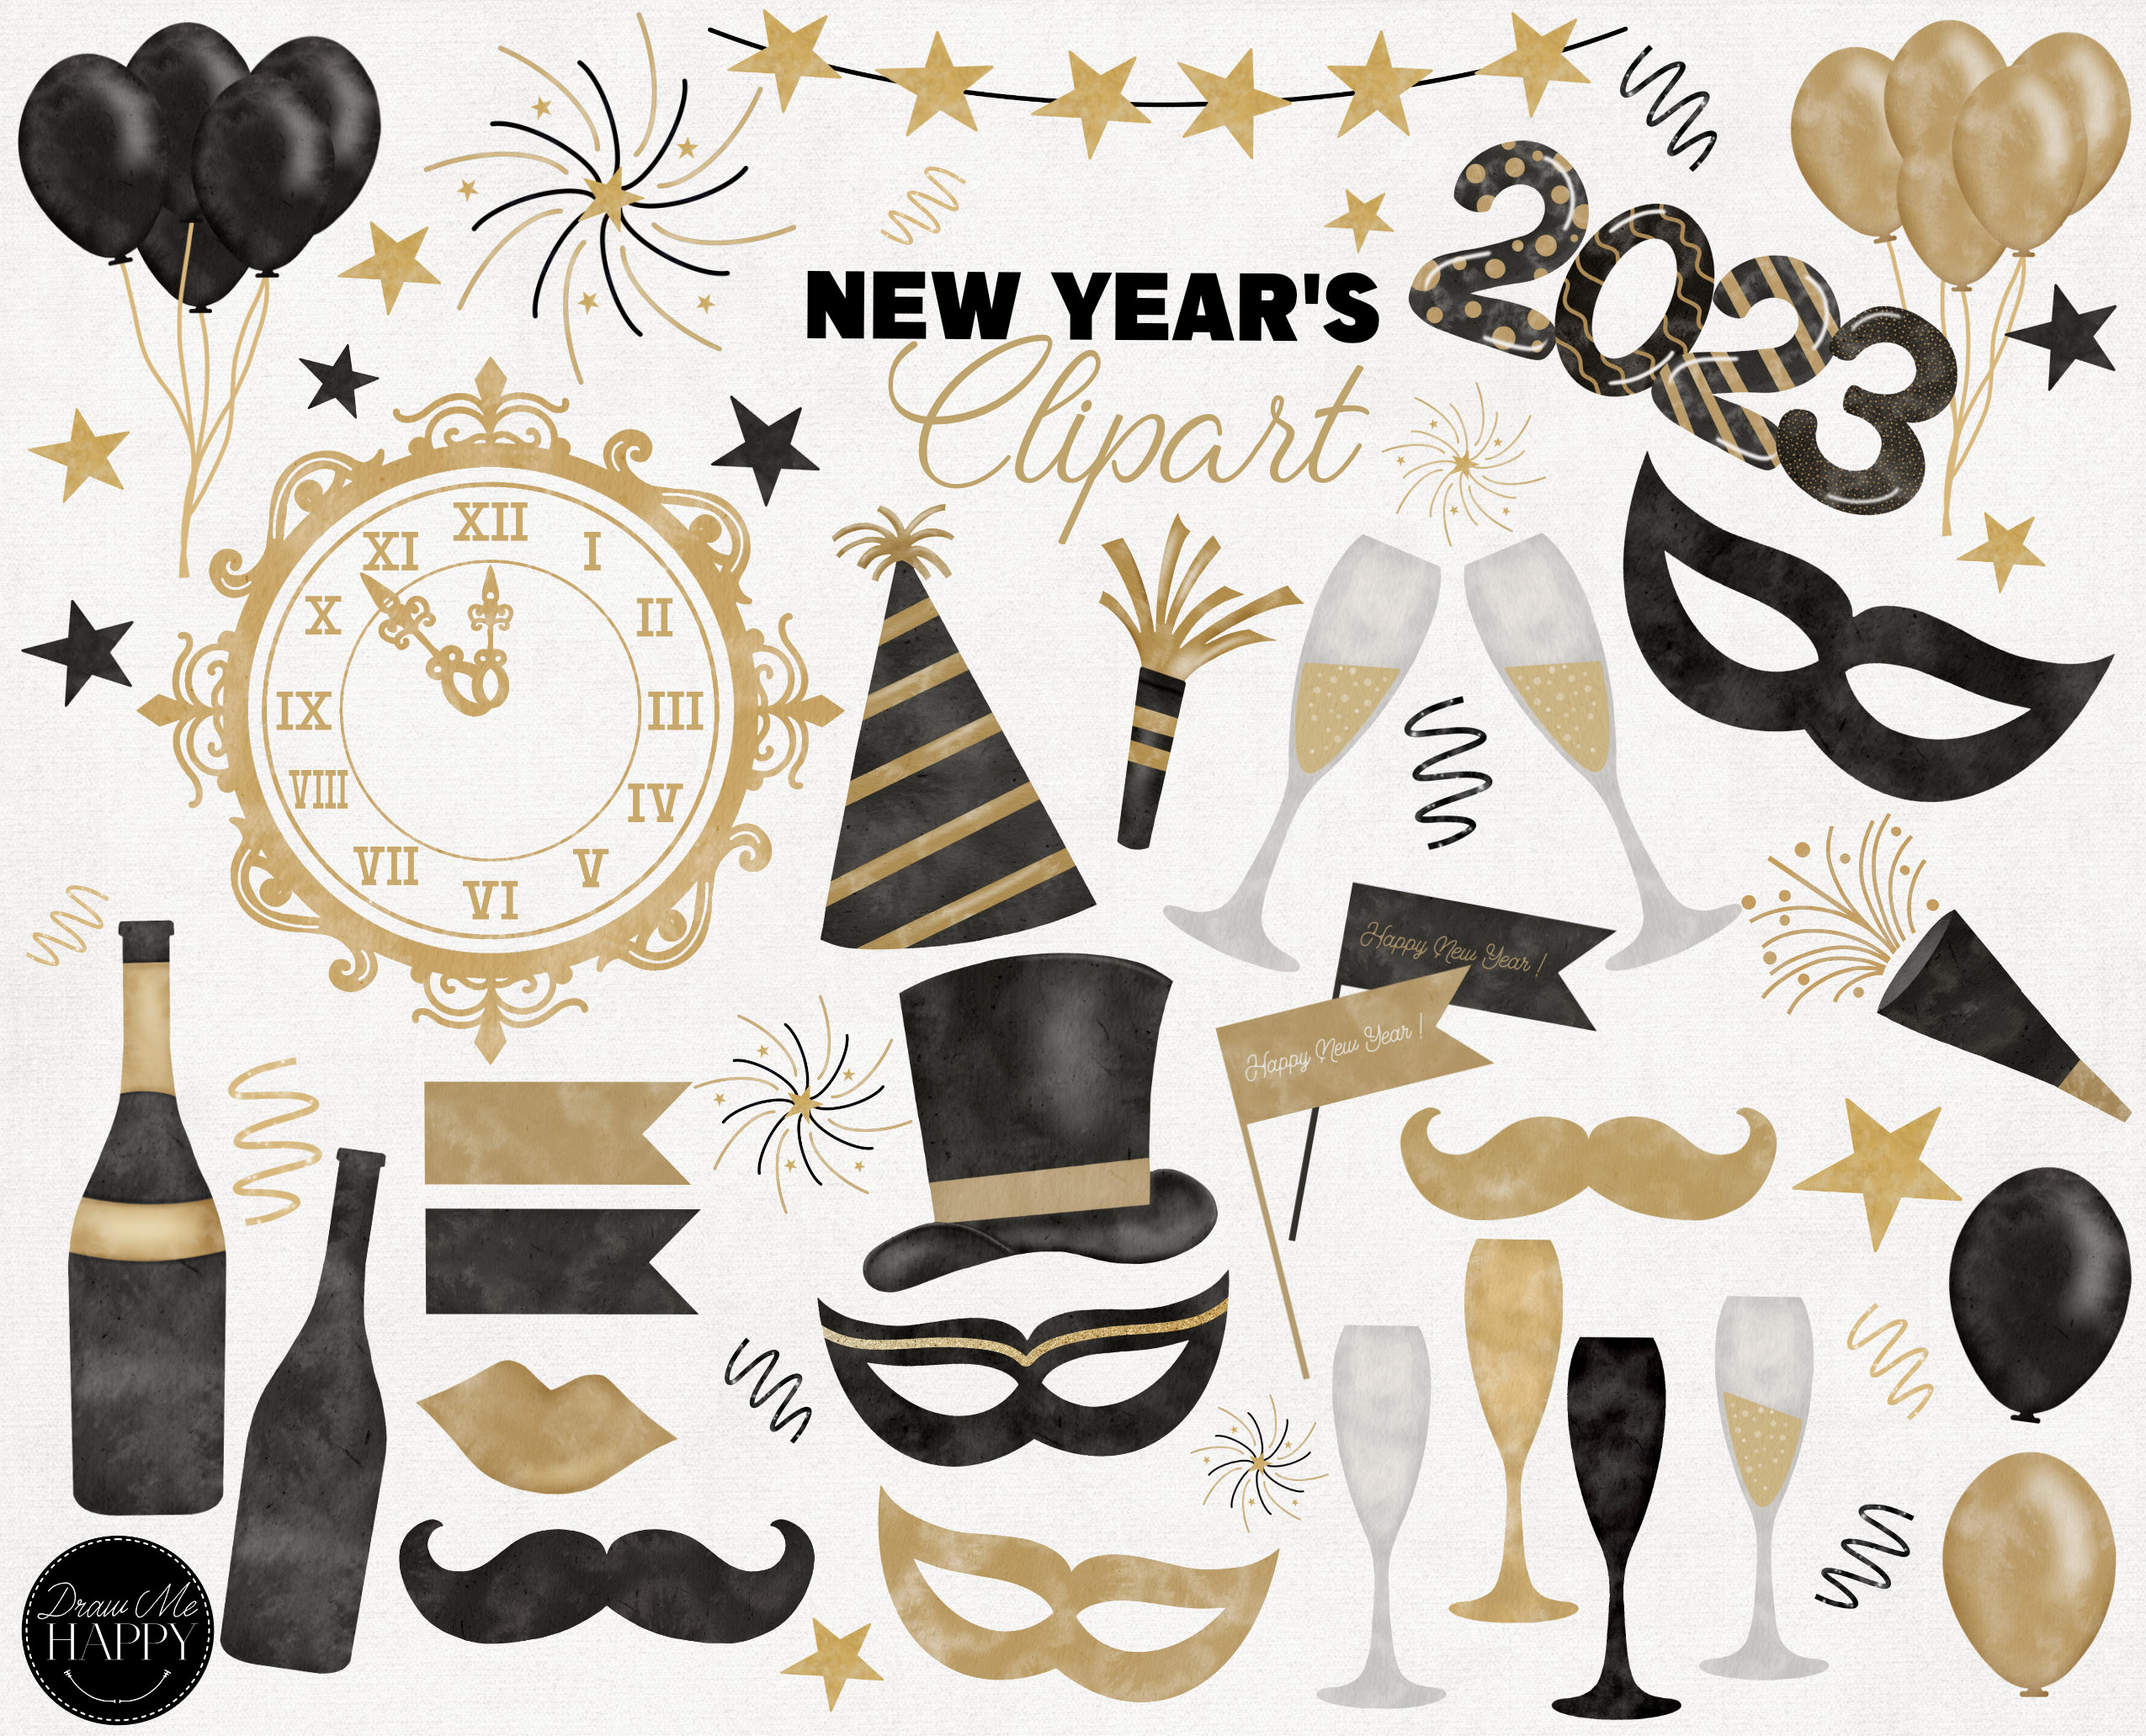 Party Time Design, Happy New Year Clipart, Party Clipart, Balloons, New  Year Clipart, Christmas Clip Art, Winter Party, Champagne 